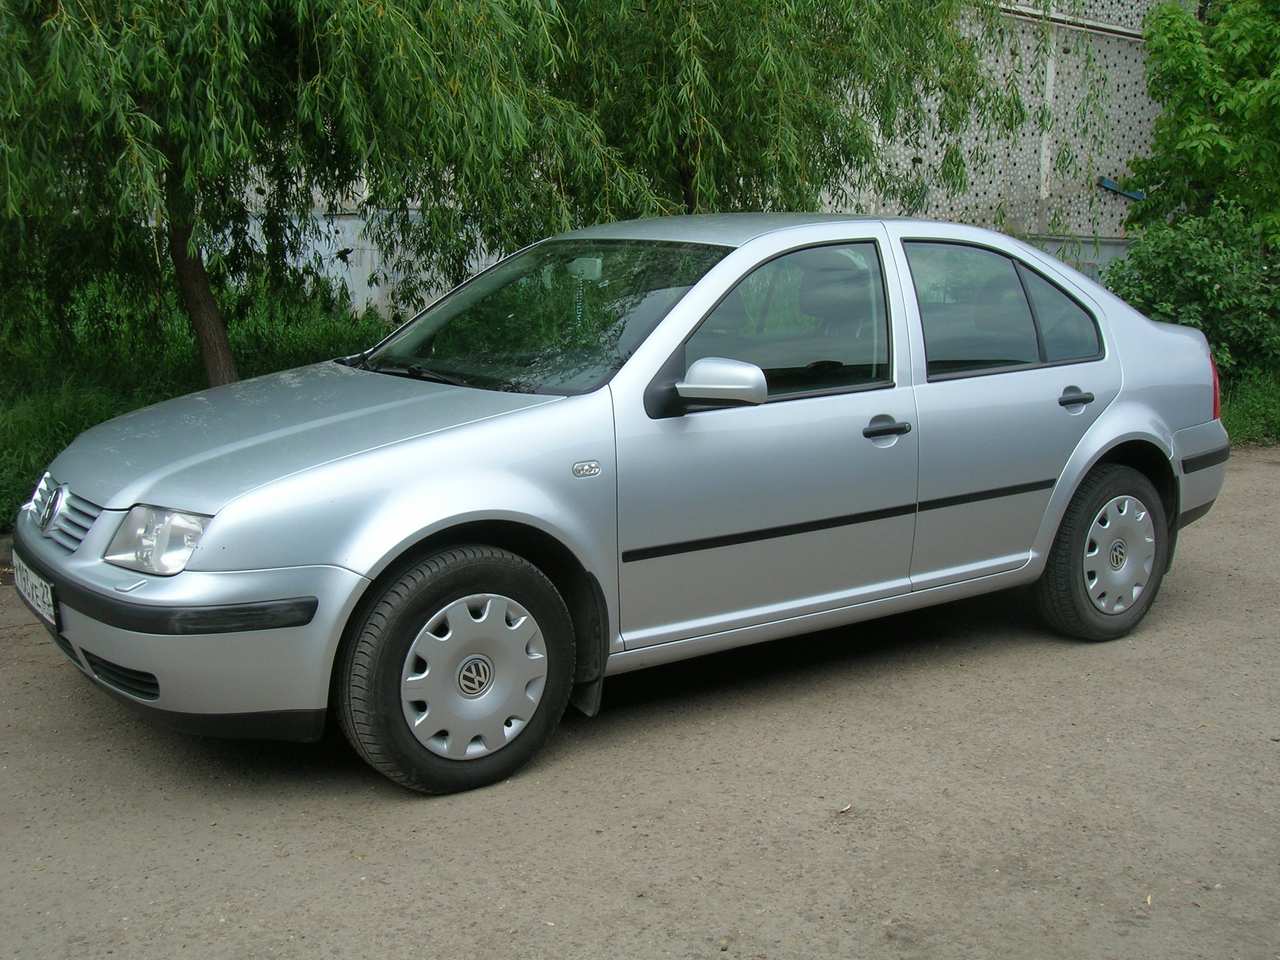 2001 Volkswagen Bora 1.6 related infomation,specifications